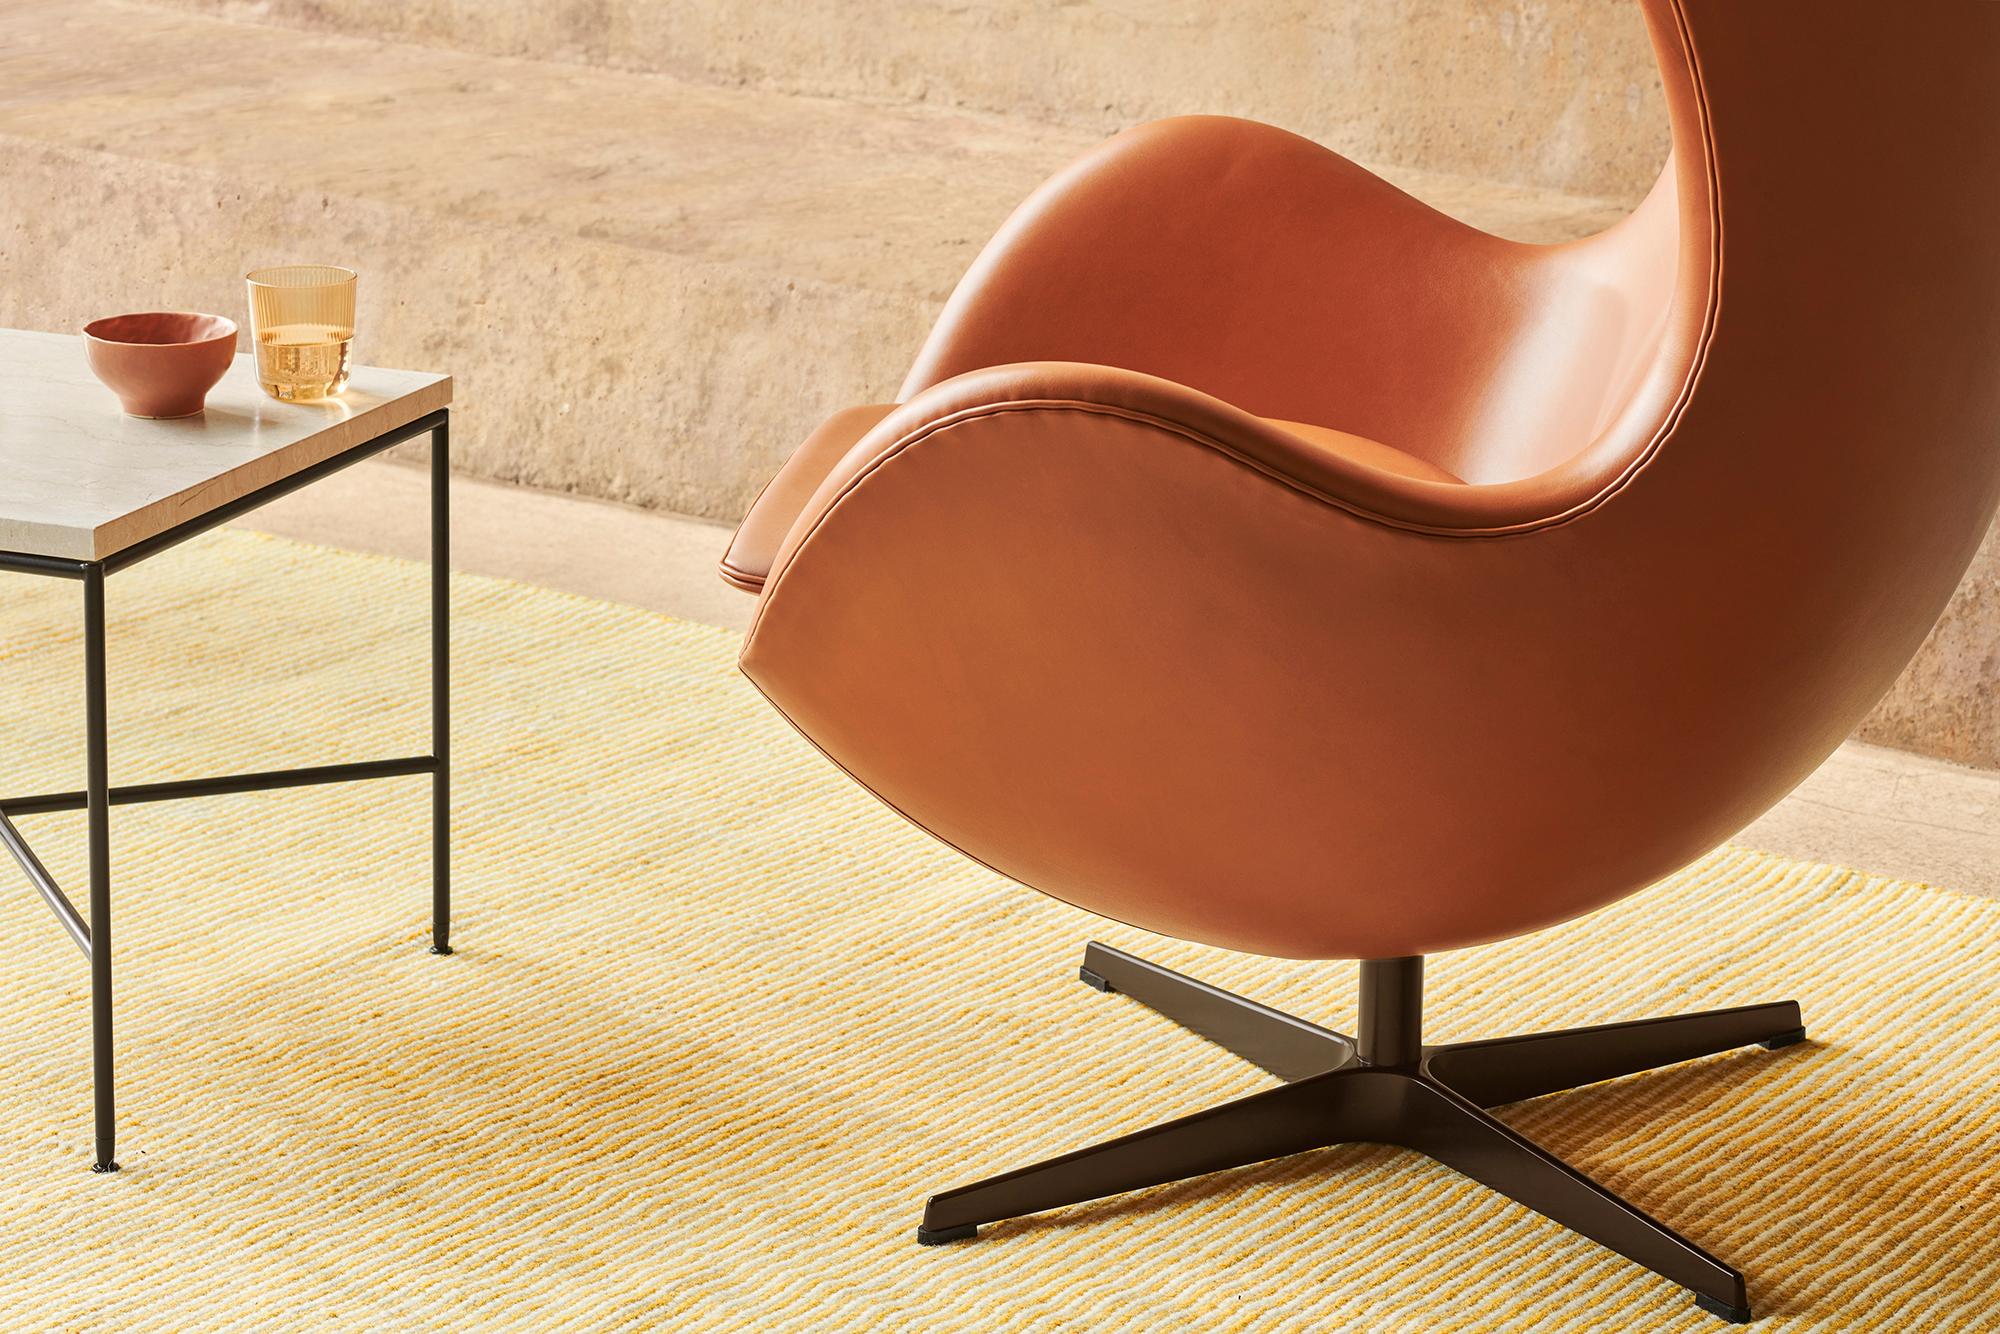 Arne Jacobsen 'Egg' Chair for Fritz Hansen in Leather Upholstery (Cat. 5) In New Condition For Sale In Glendale, CA